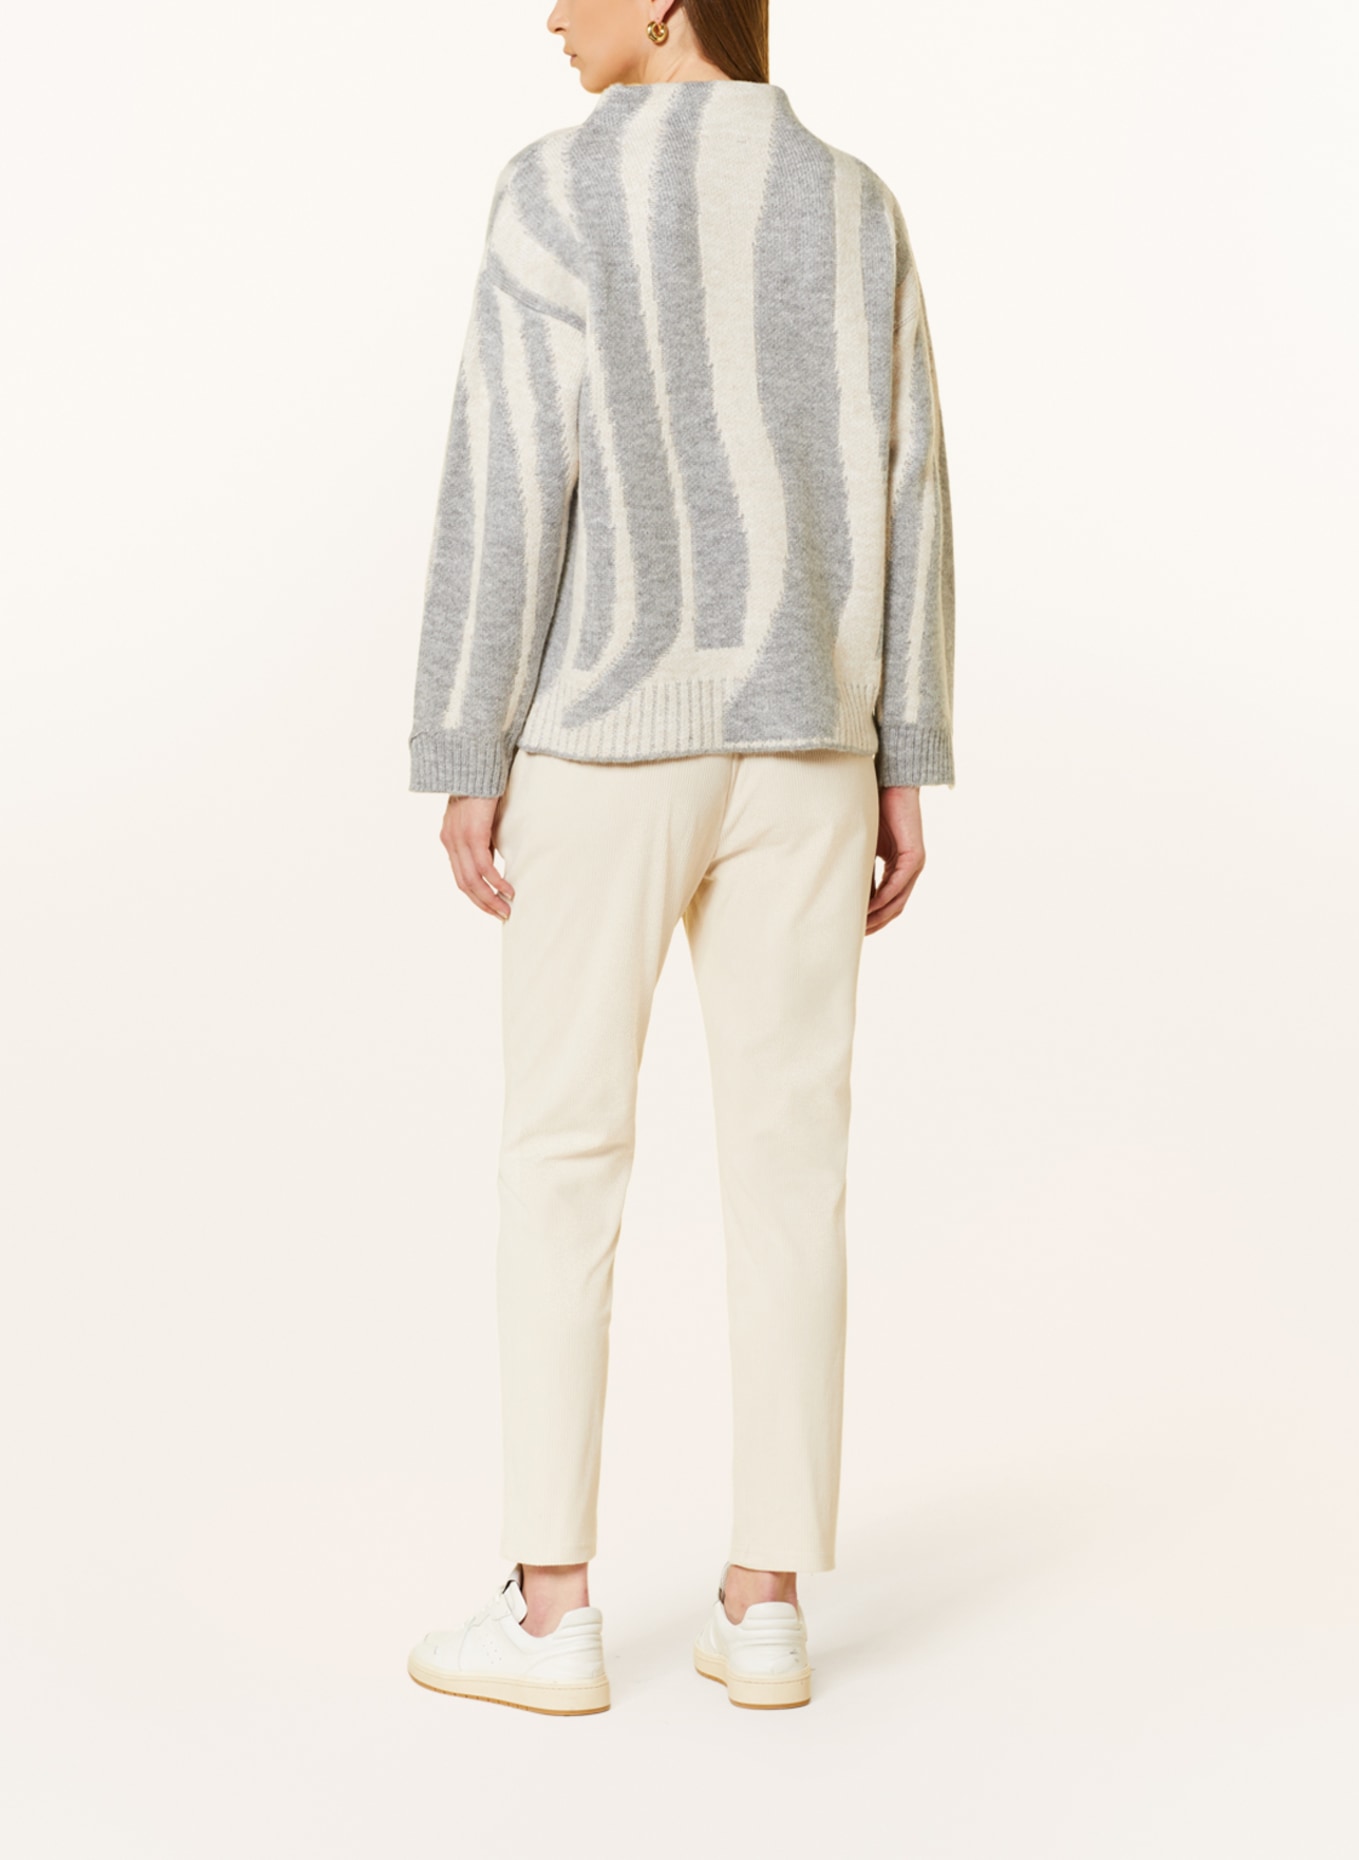 MORE & MORE Sweater with decorative gems, Color: CREAM/ LIGHT GRAY (Image 3)